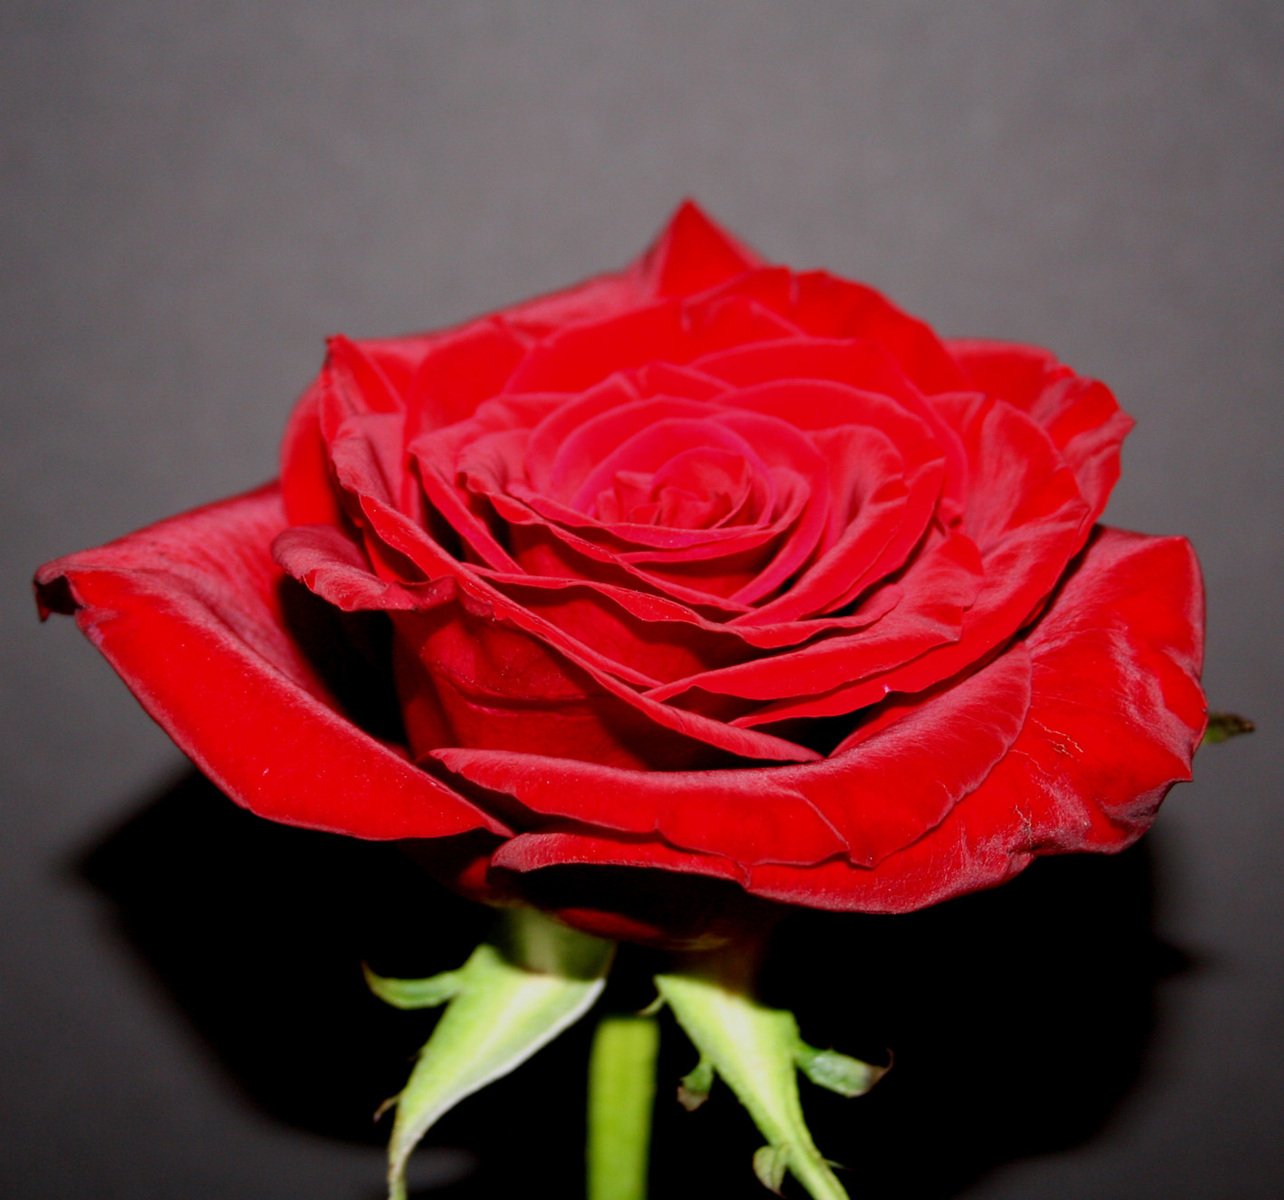 a single red rose with green stems is displayed